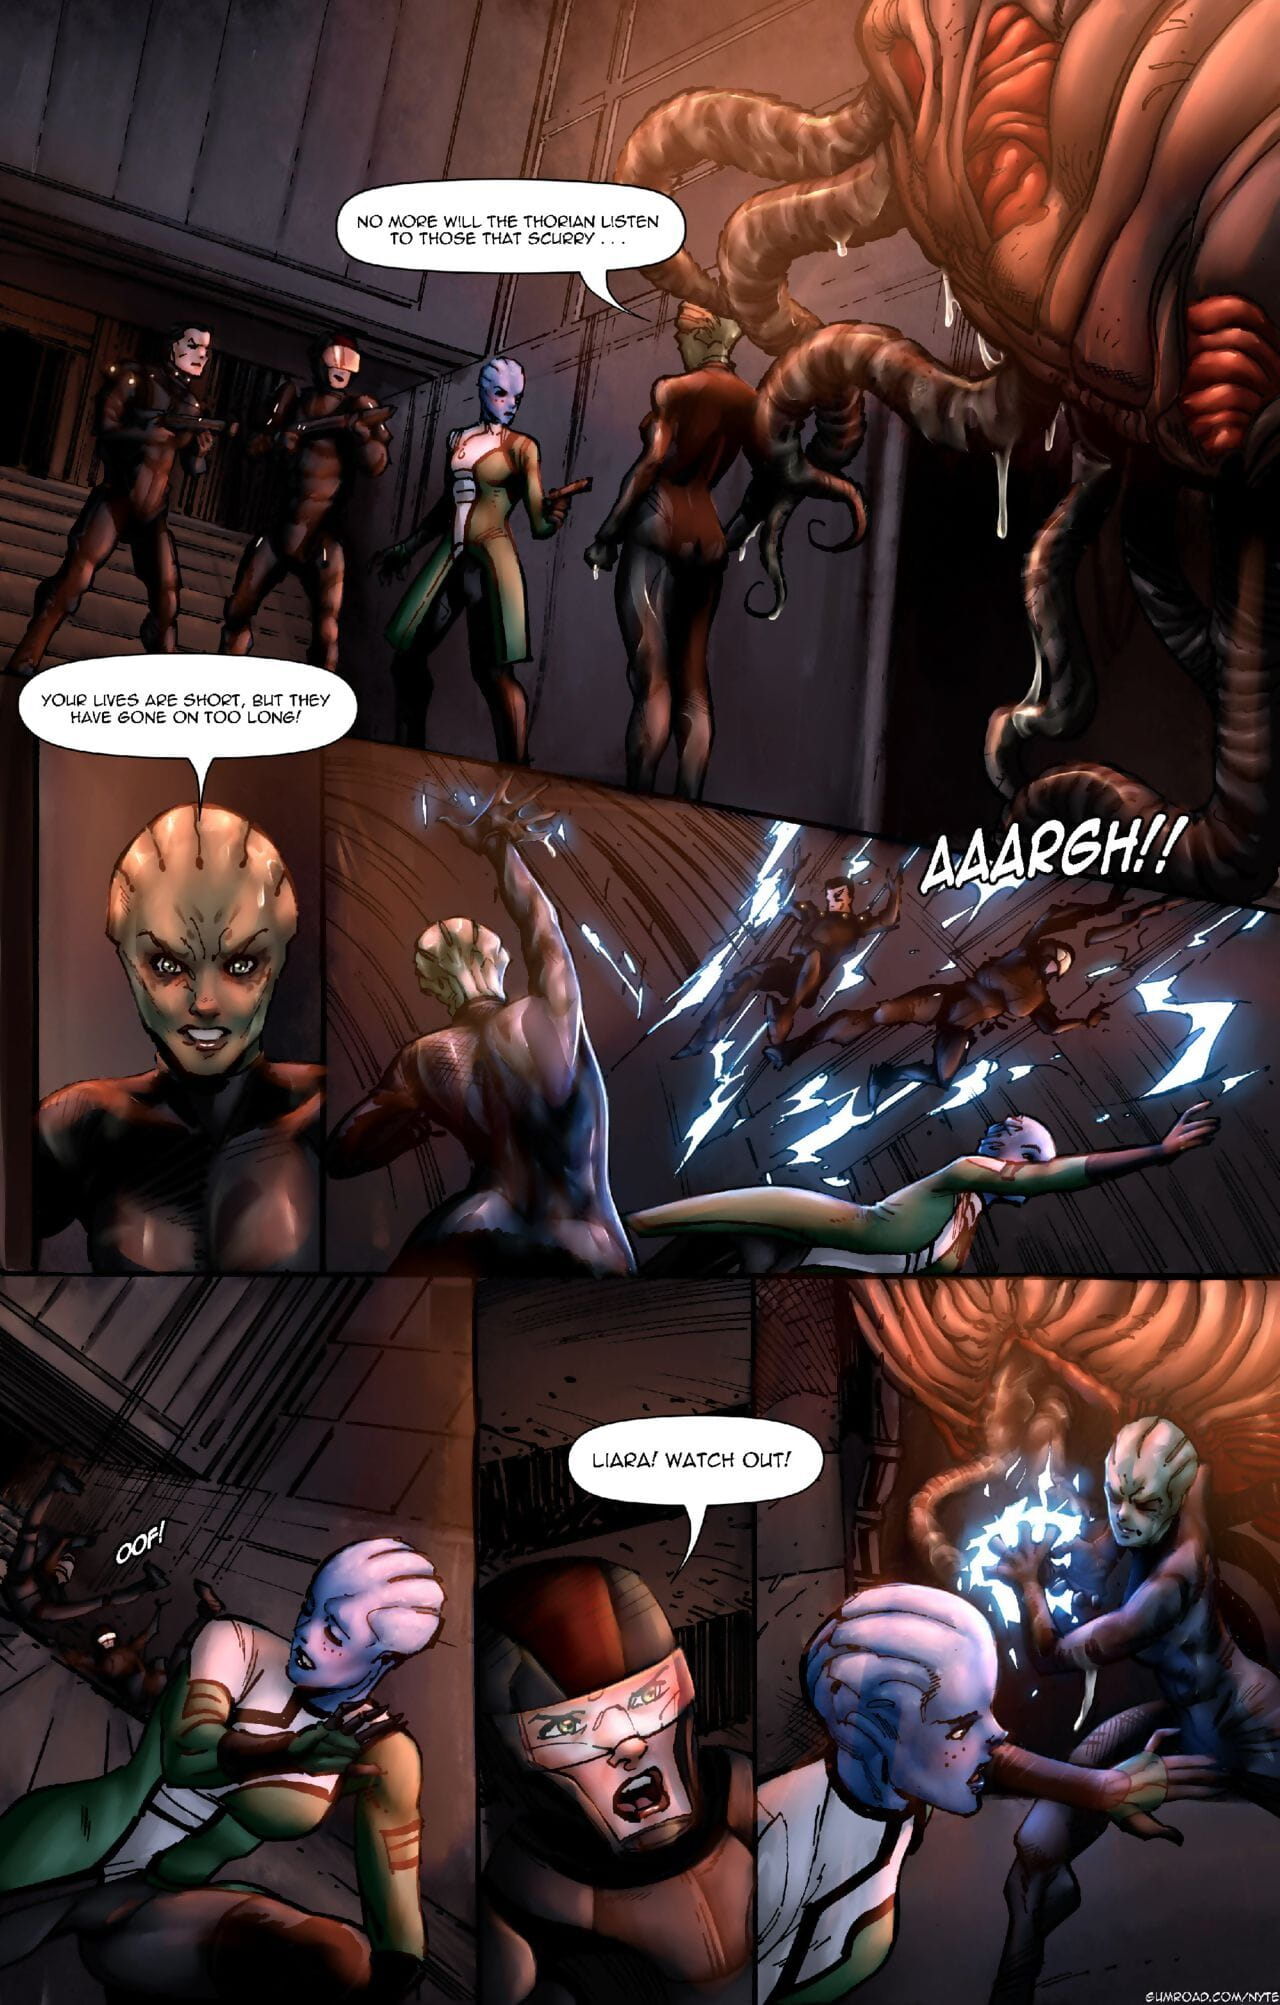 Mass Effect- Wrath Of The Thorian- Nyte page 1